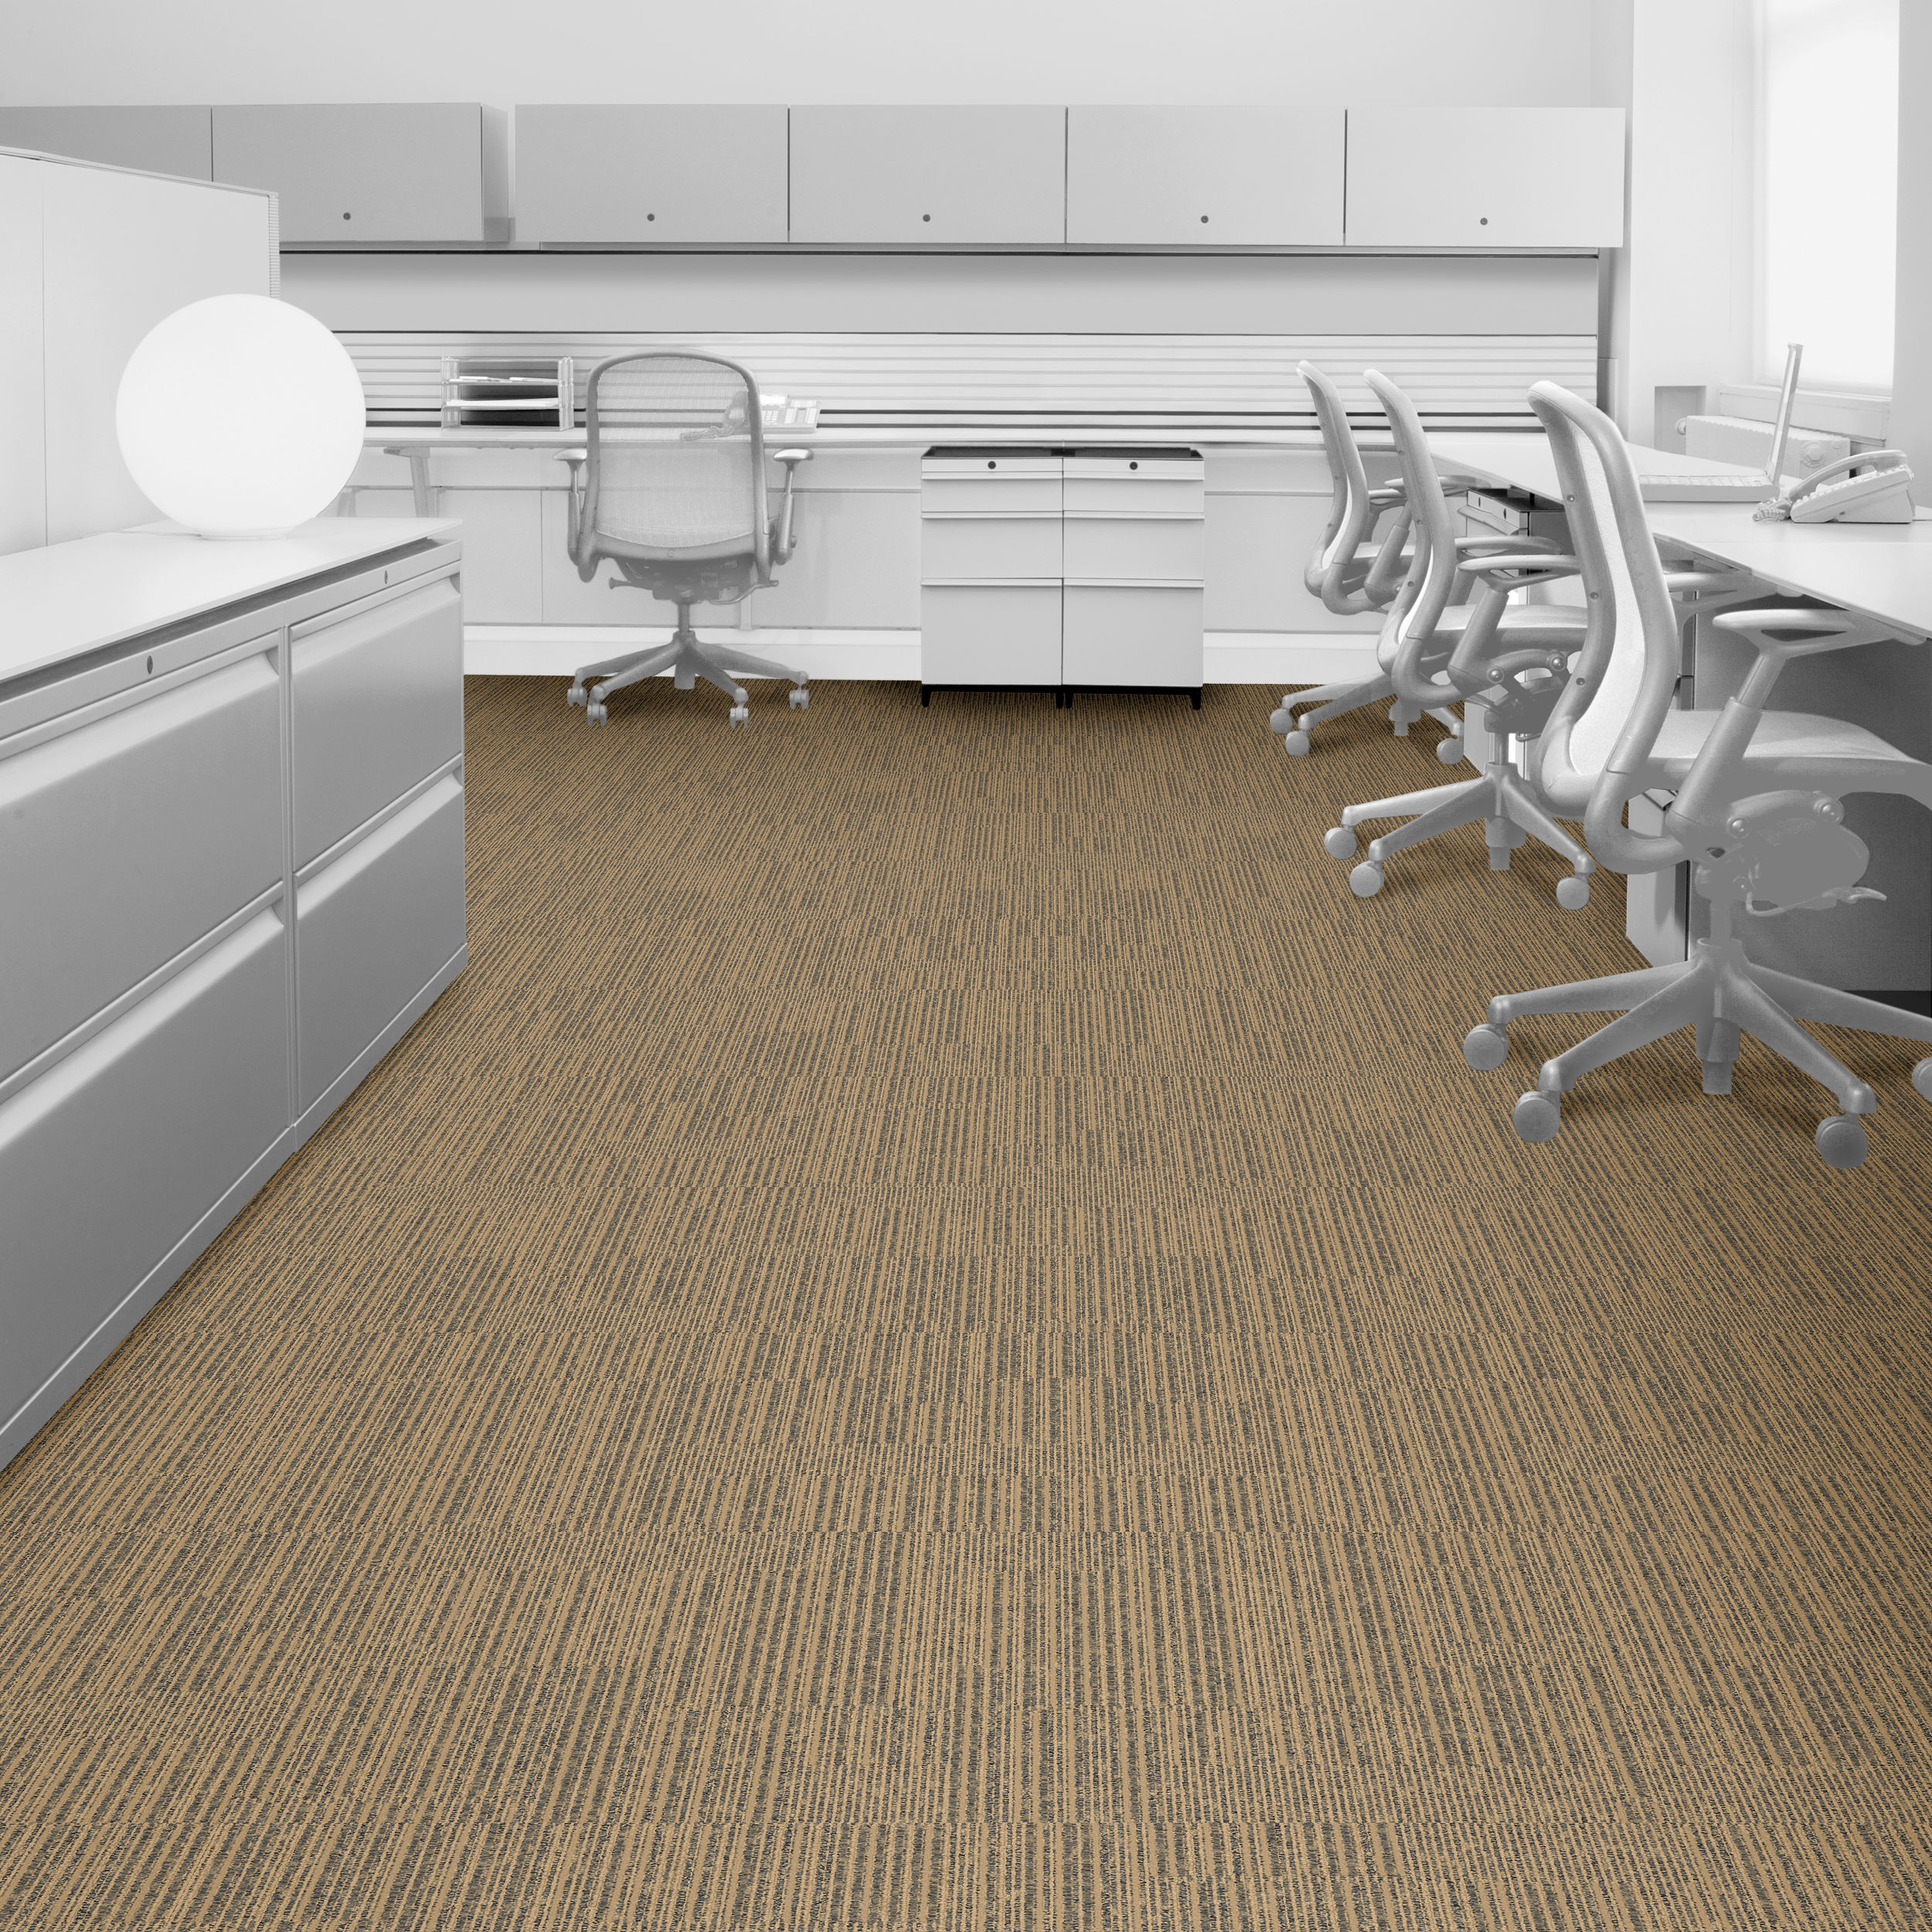 Interface Equilibrium Contentment Carpet Tile in office setting.